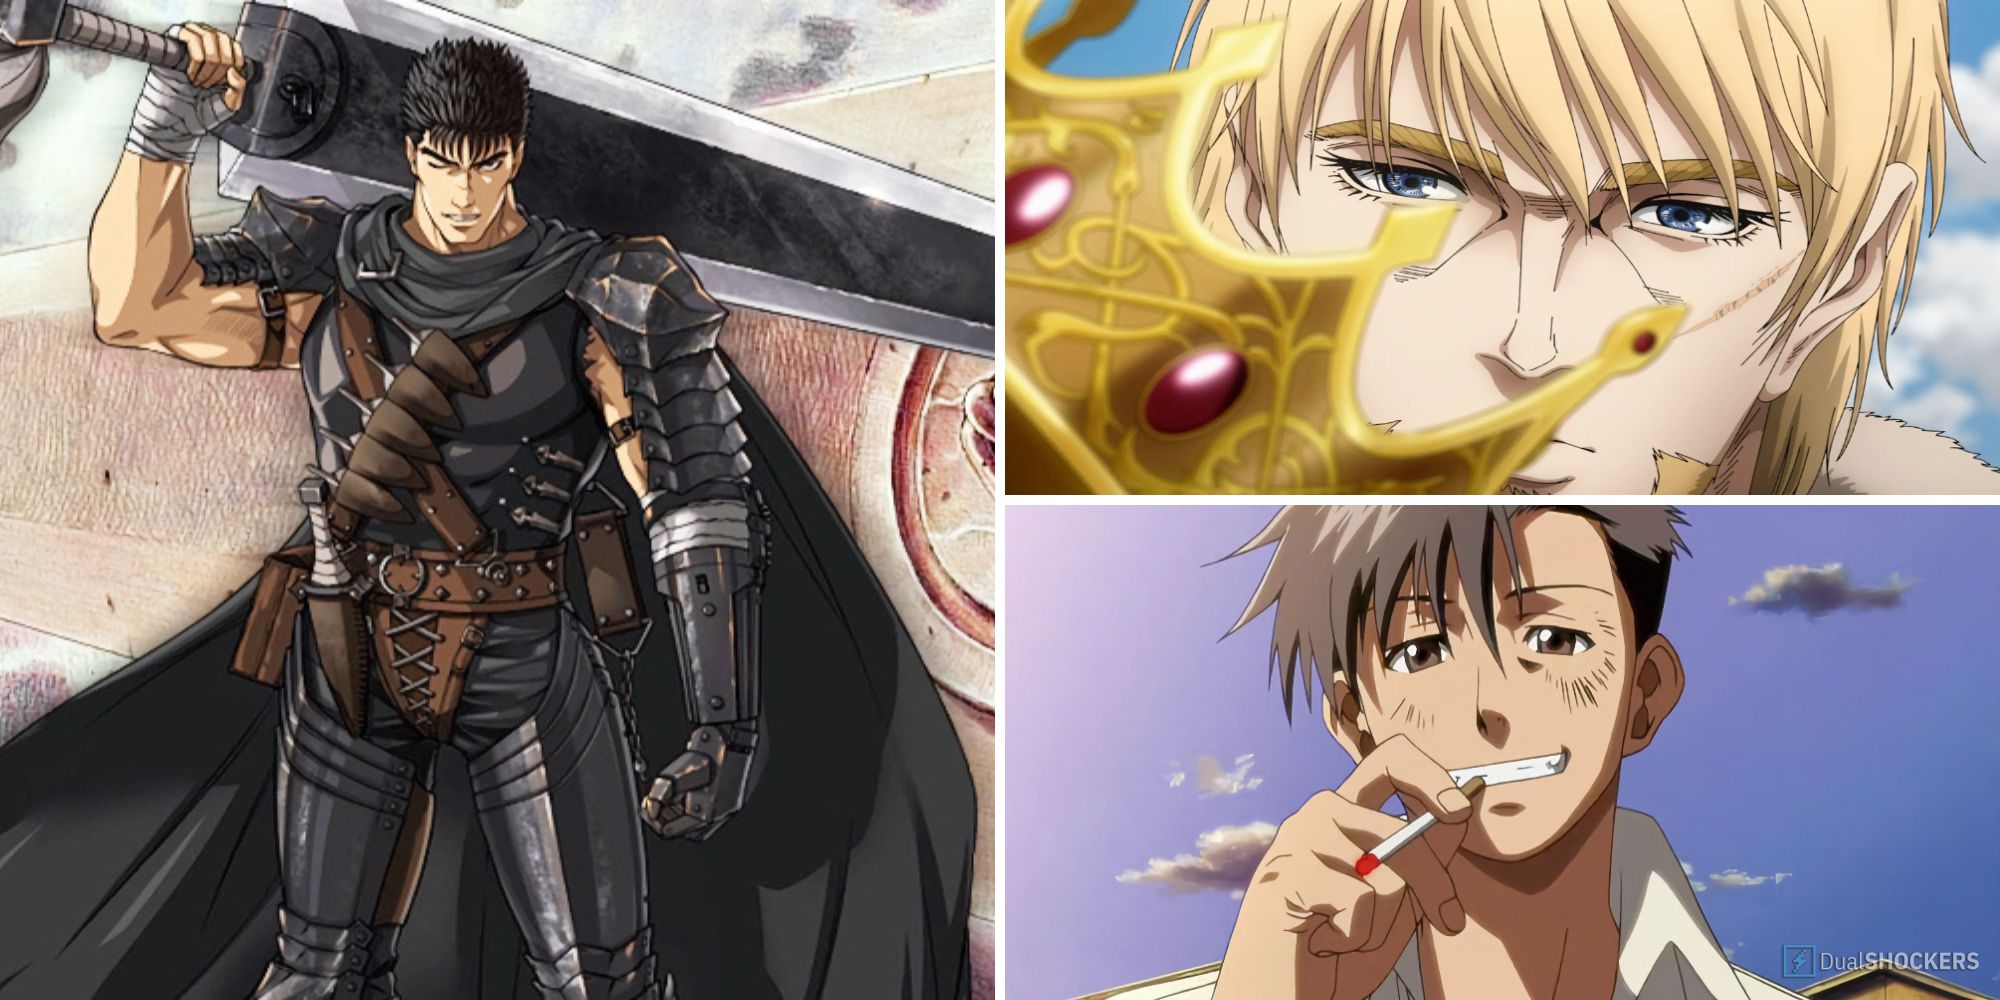 10 best shonen anime series that will take your breath away